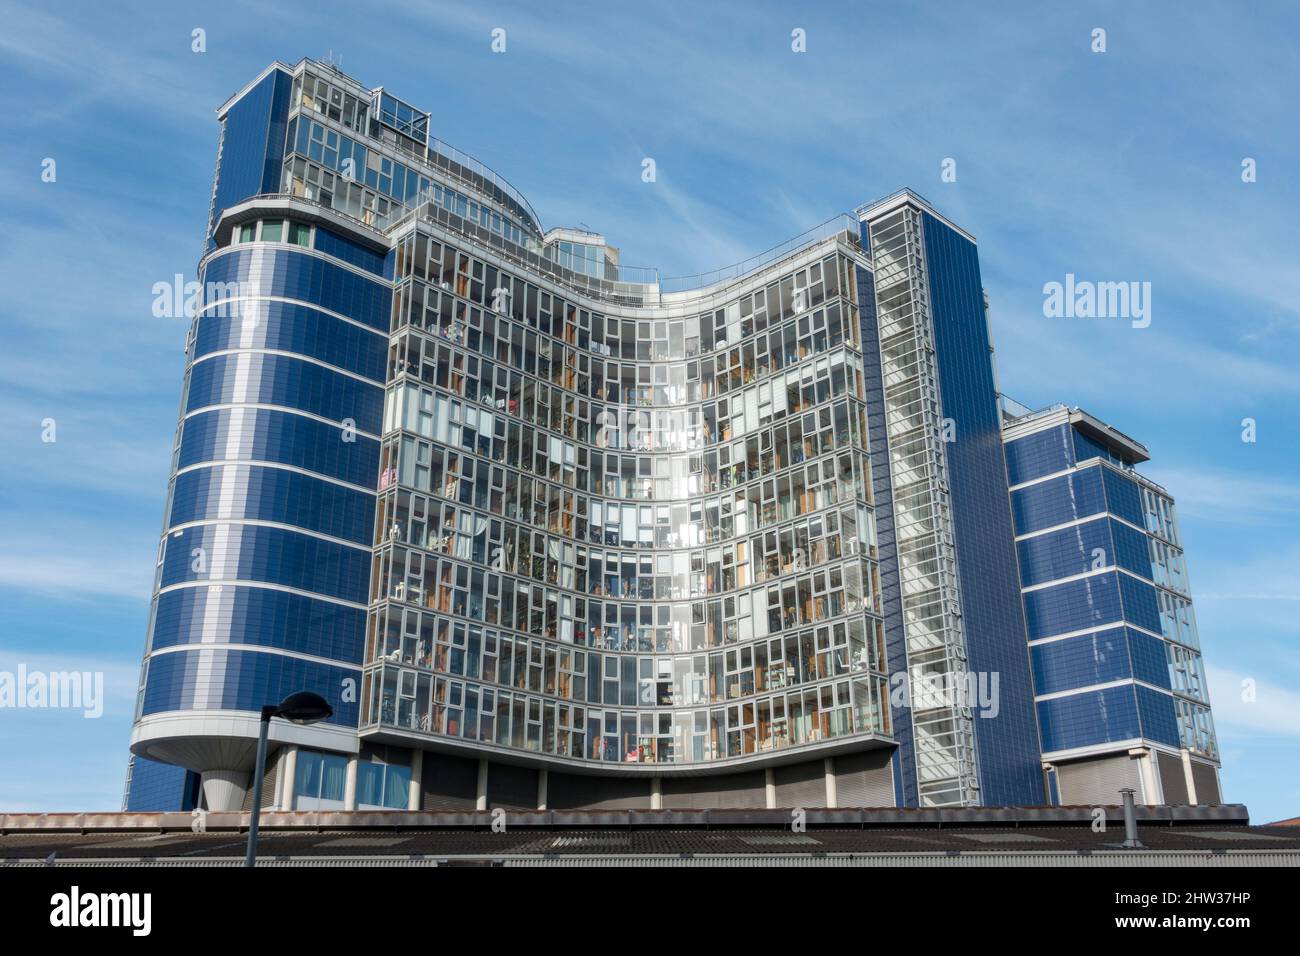 South facing facade of Falcon Wharf (34 Lombard Road), an impressive development on the side of the River Thames in London, UK. Stock Photo